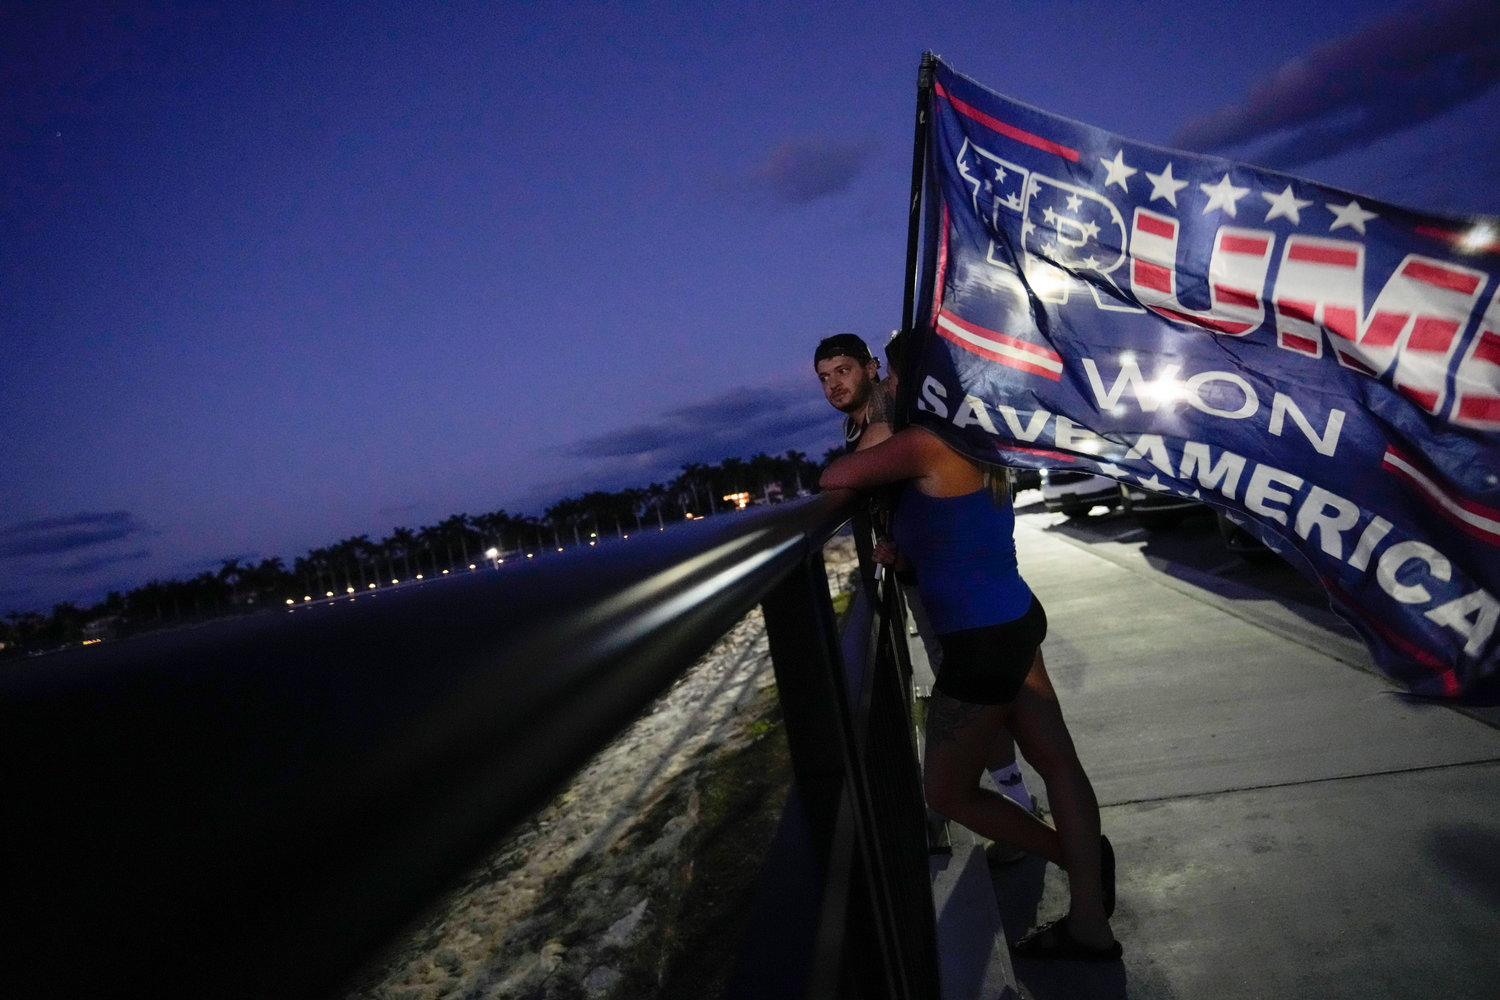 People hold a flag to show their support for former President Donald Trump following the news that Trump has been indicted by a Manhattan grand jury, Thursday, March 30, 2023, near Trump's Mar-a-Lago estate in Palm Beach, Fla.